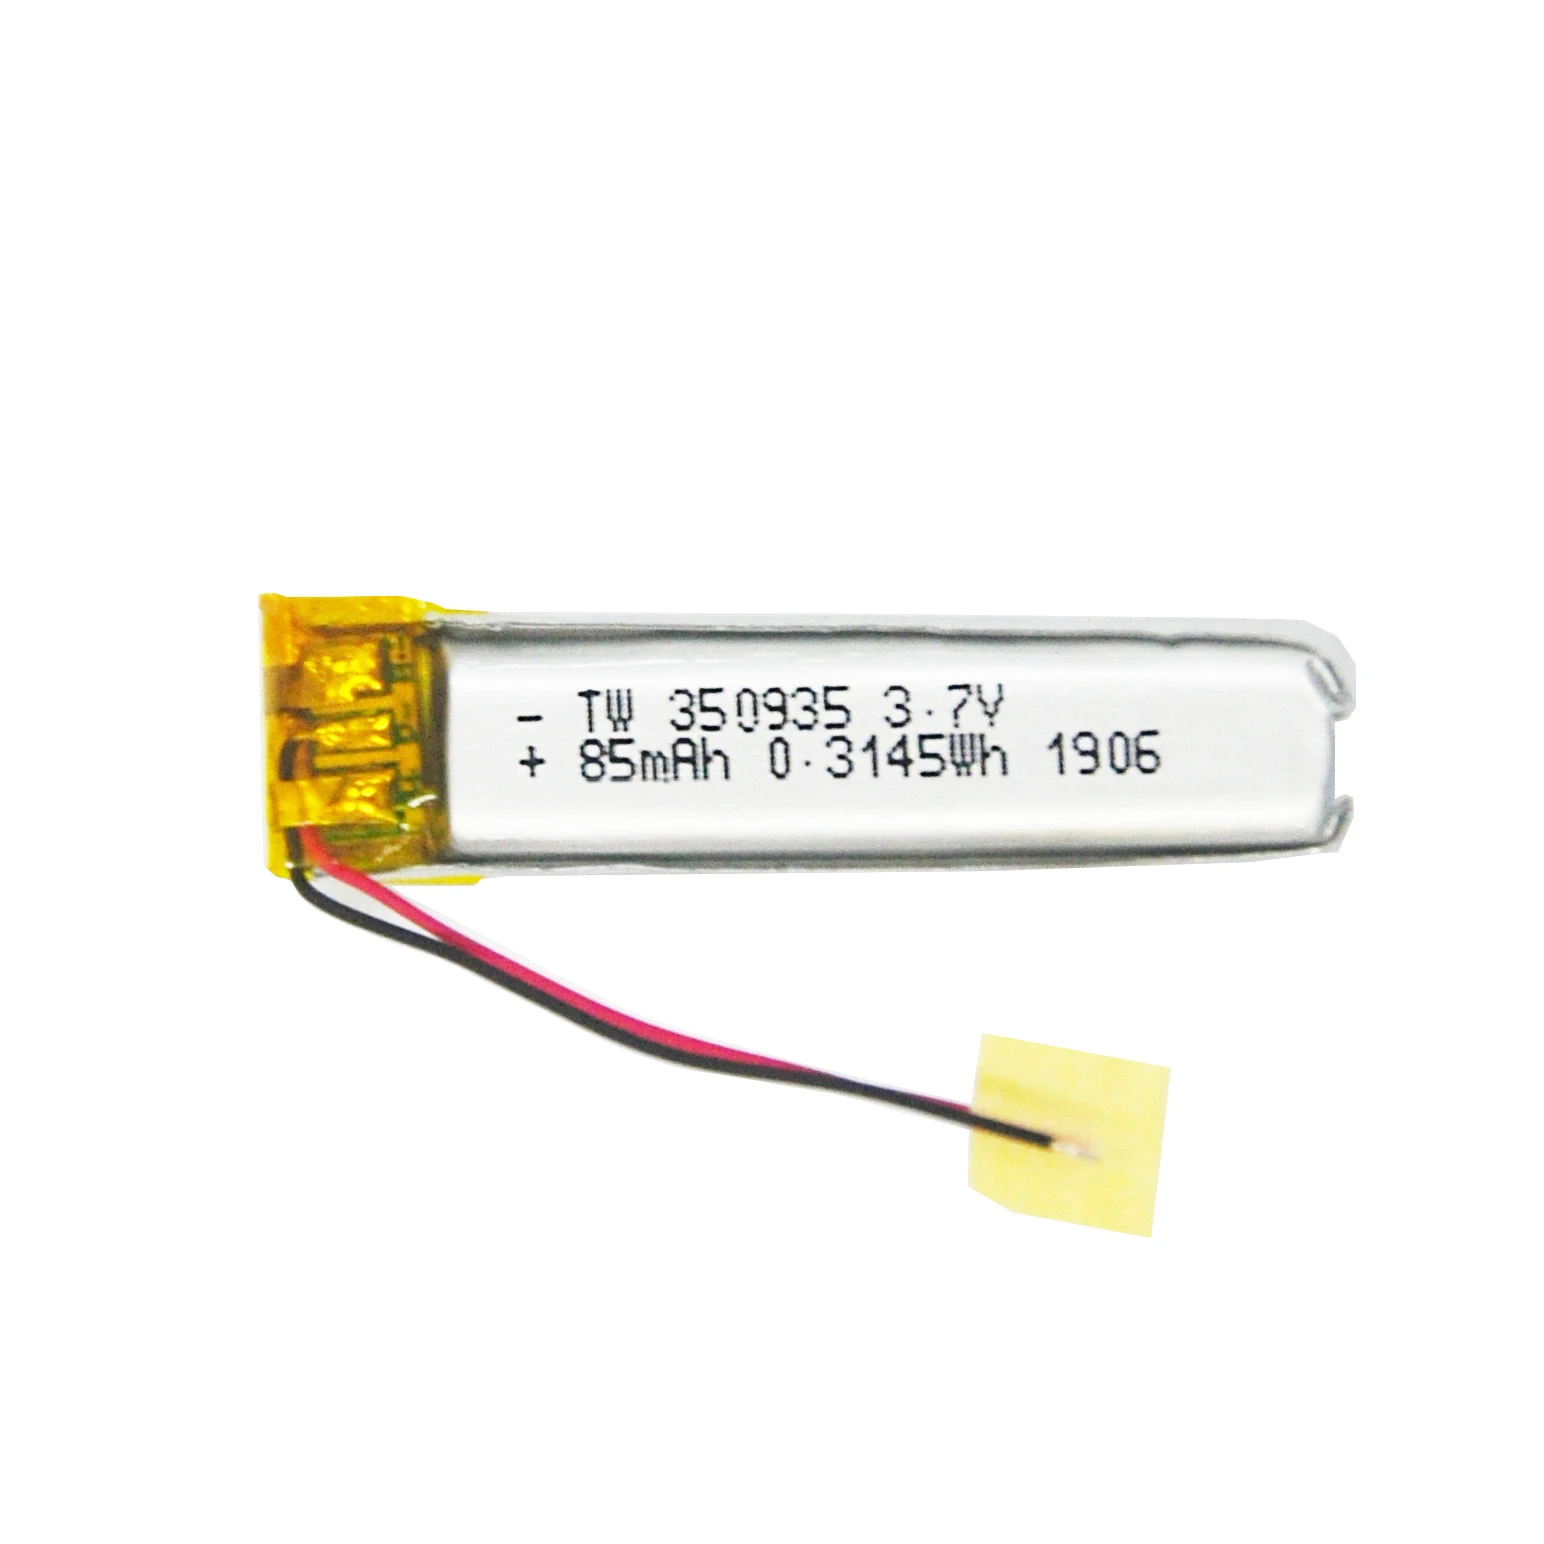 Rechargeable 350938 3.7V 85mAh High Cycle  Lithium Polymer Li-ion Battery